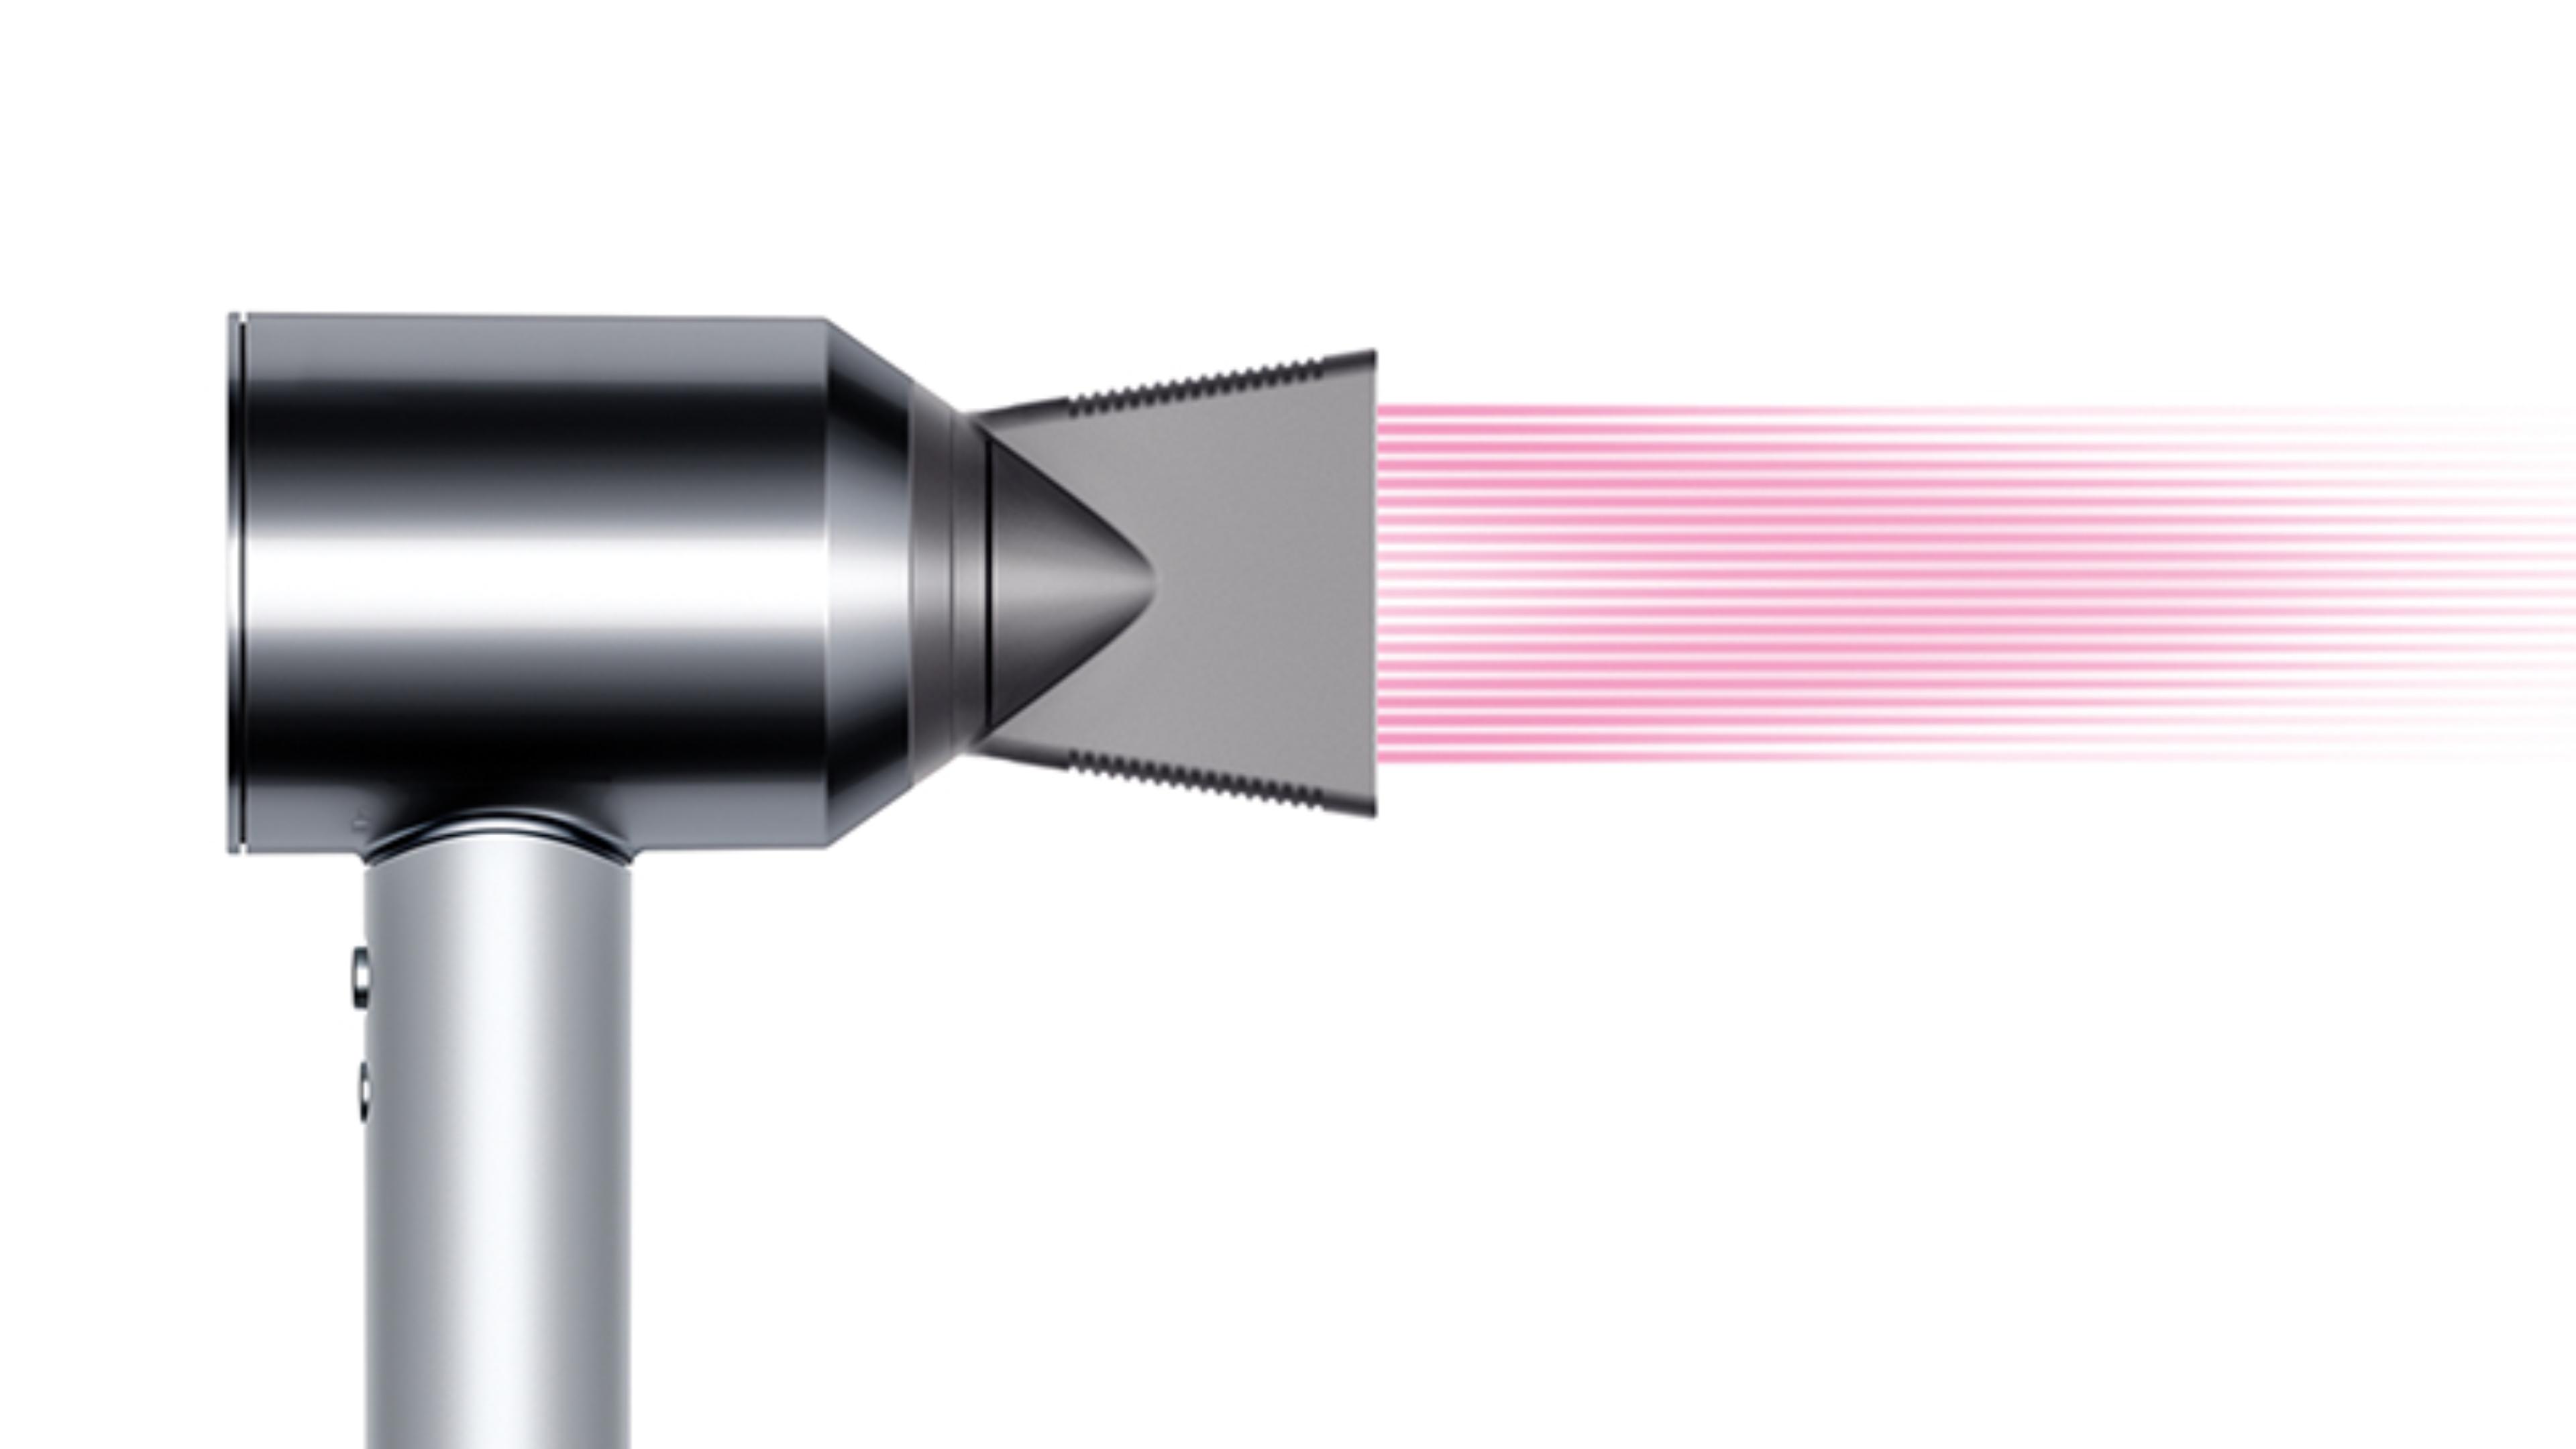 Dyson Supersonic™ hair dryer Professional edition with Professional concentrator attached